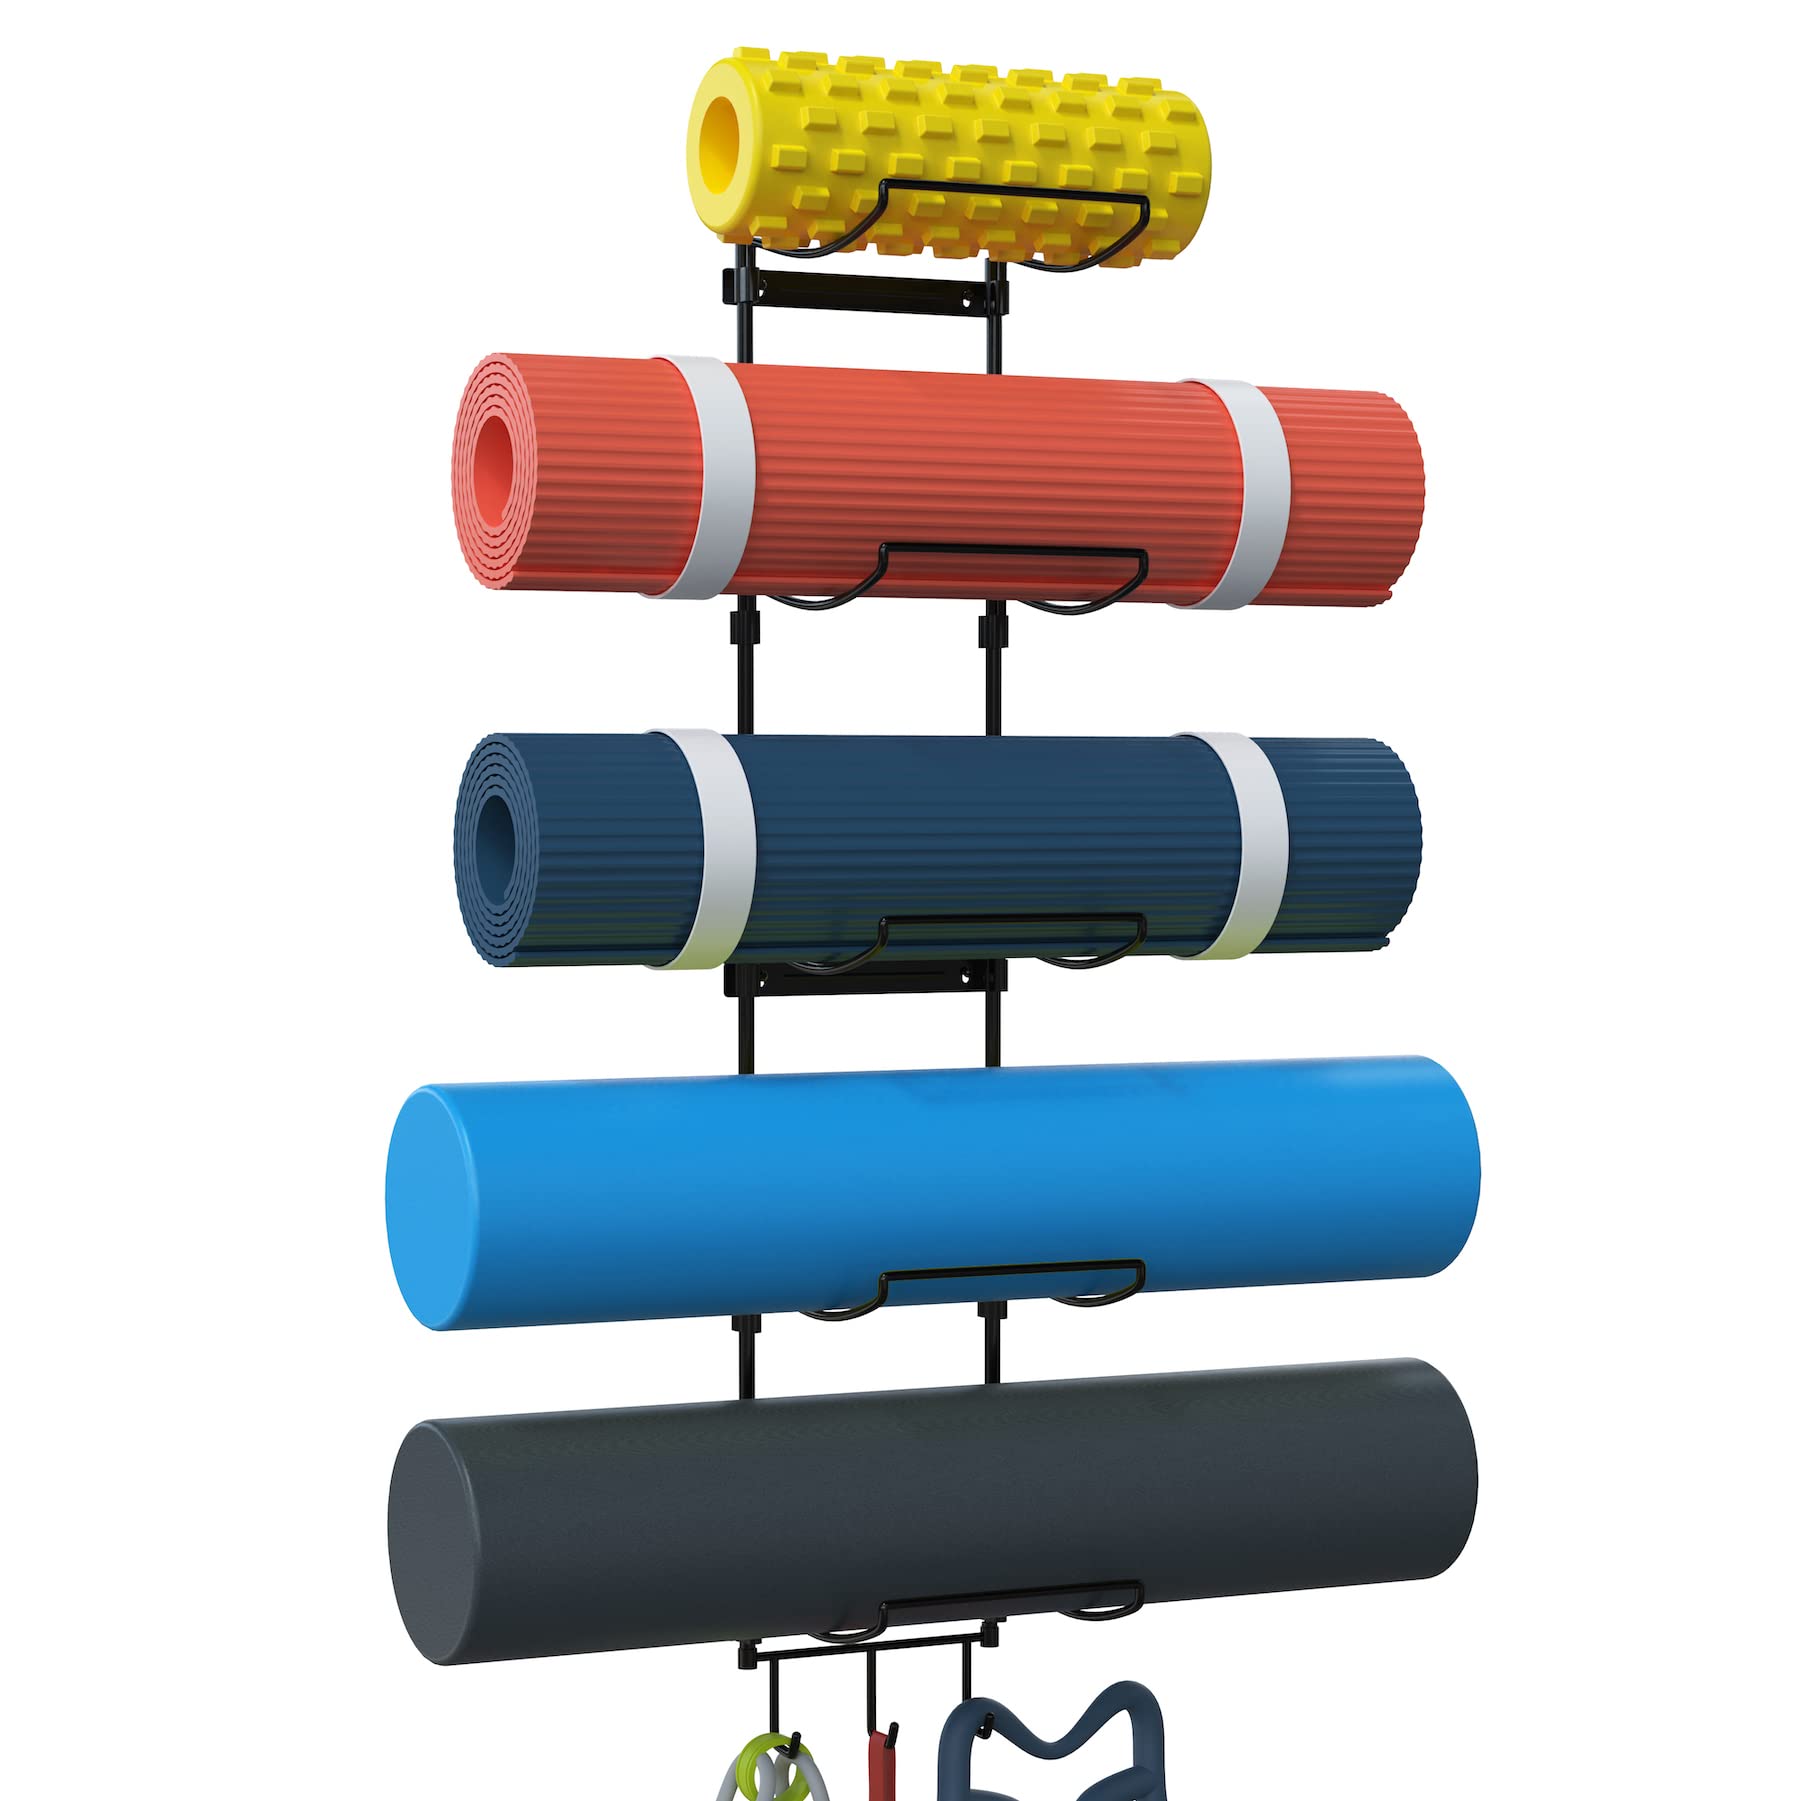 Kesito Yoga Mat Holder Wall Mount, Wall Rack Organizer, Storage Foam Roller and Block, with 5 Sectional and 3 Hooks for Hanging Yoga St